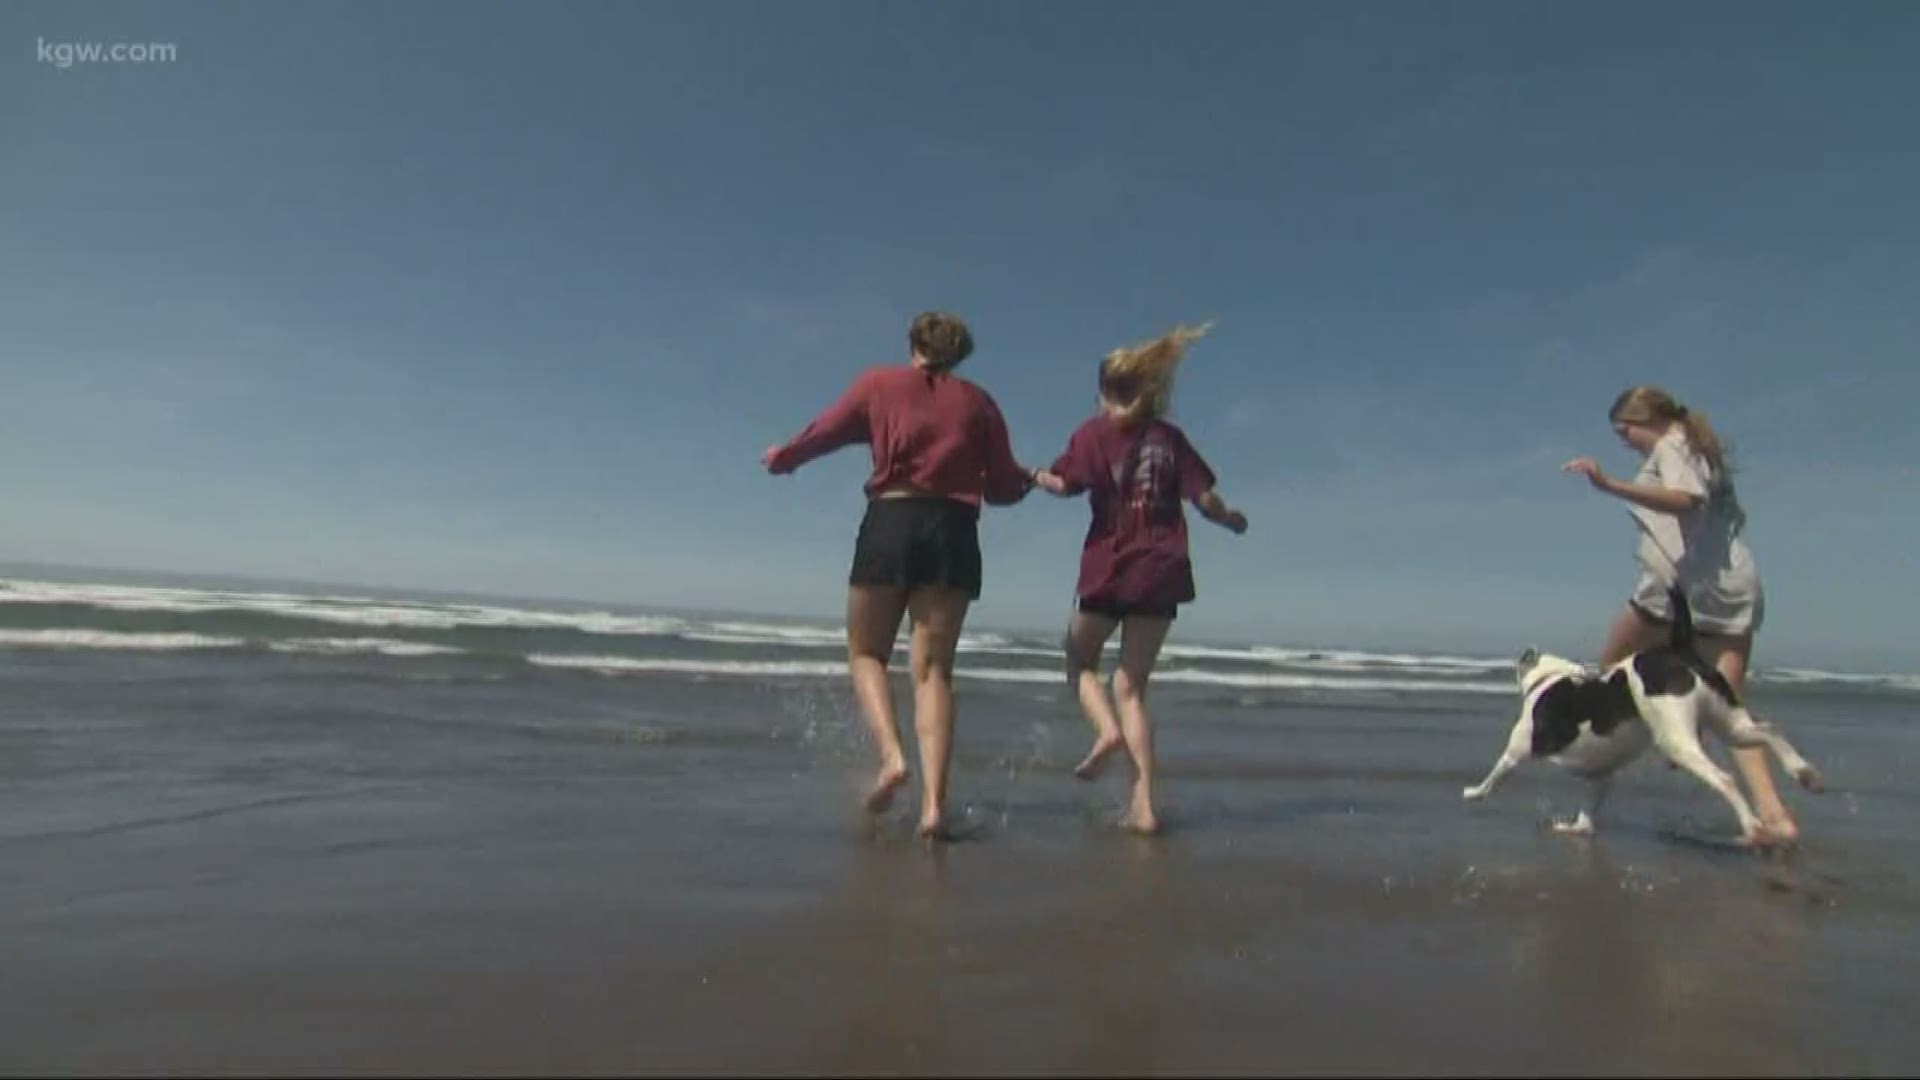 After a day of record-setting heat on the Oregon Coast, residents and tourists enjoy the drop in temperature to normal summer weather.